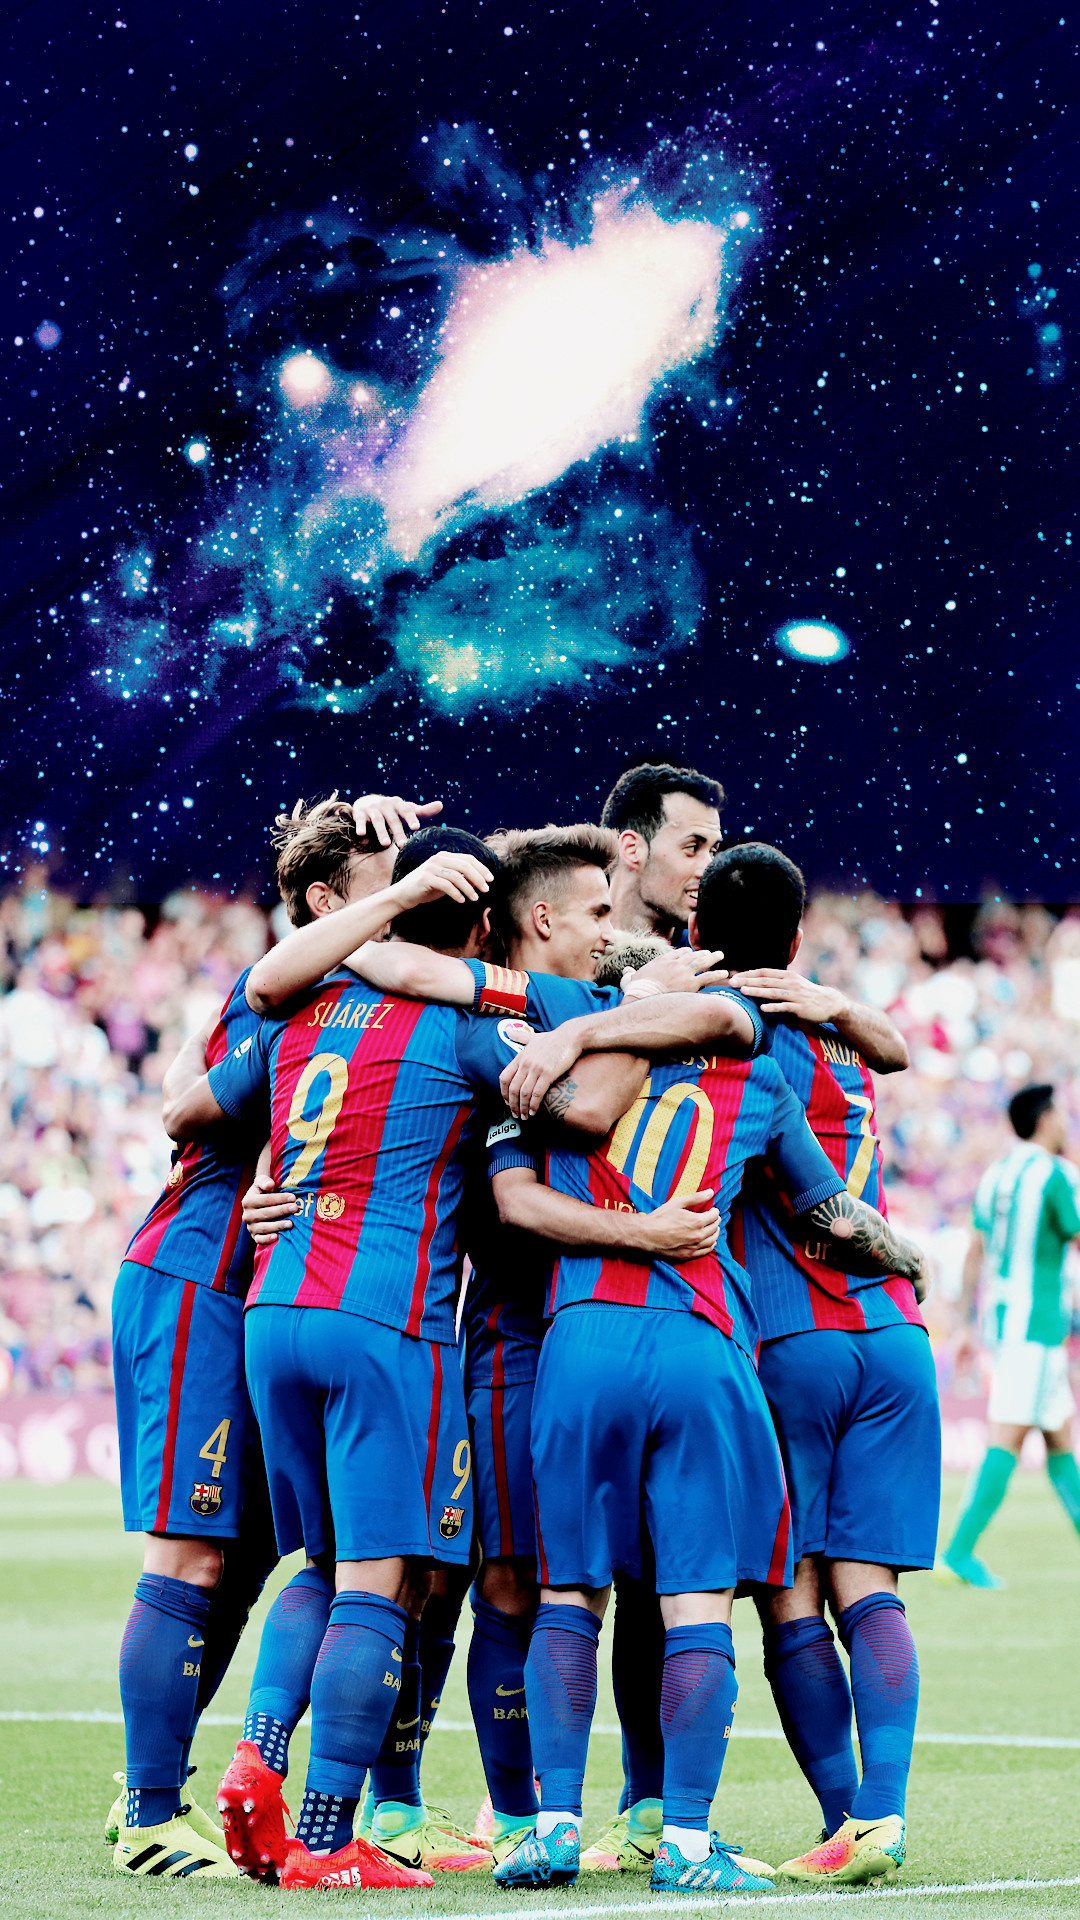 Laliga wallpapers, Expressive images, Football passion, Artistic designs, 1080x1920 Full HD Handy